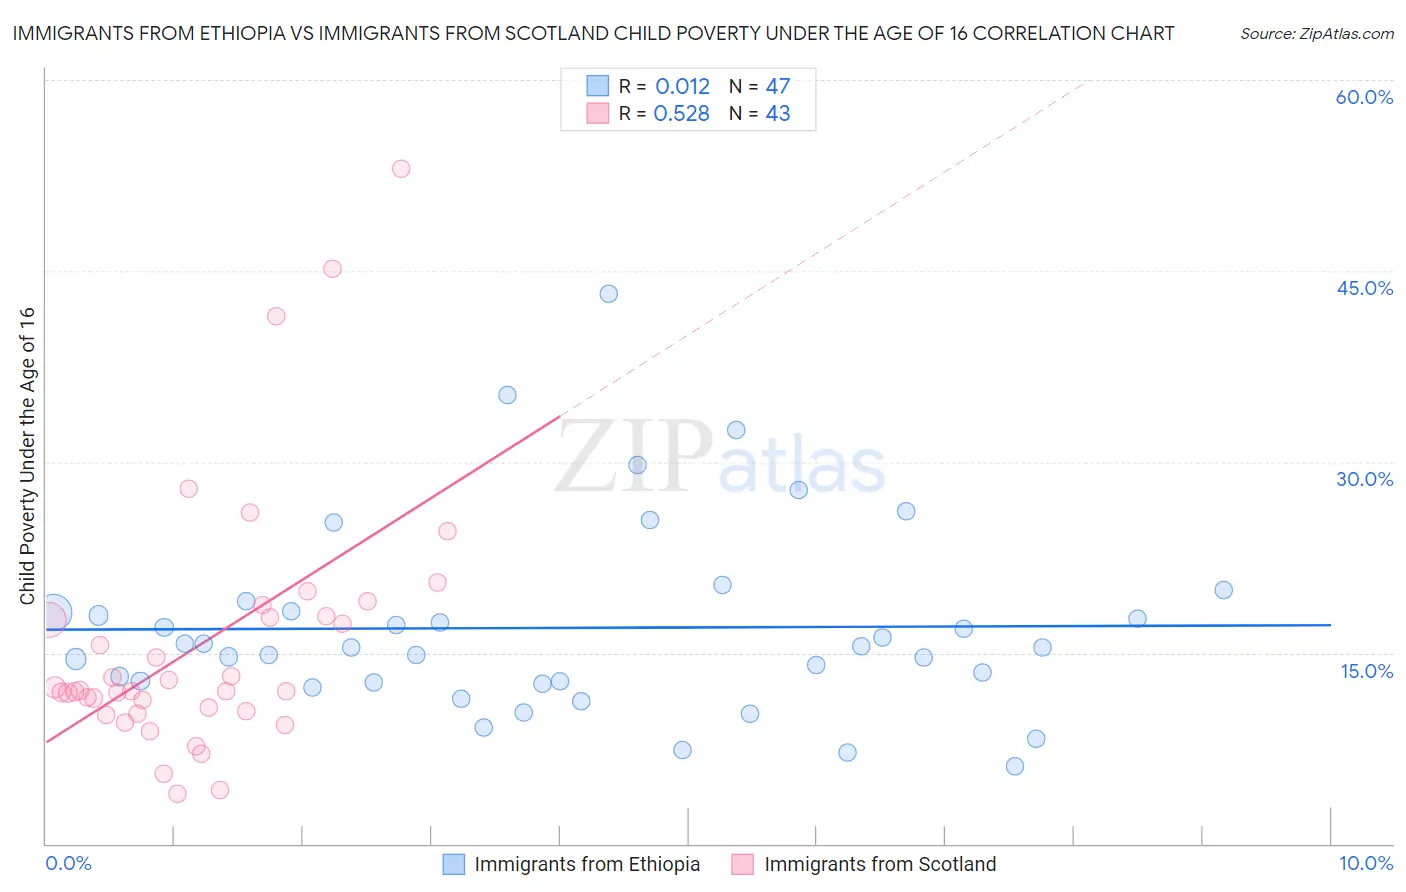 Immigrants from Ethiopia vs Immigrants from Scotland Child Poverty Under the Age of 16